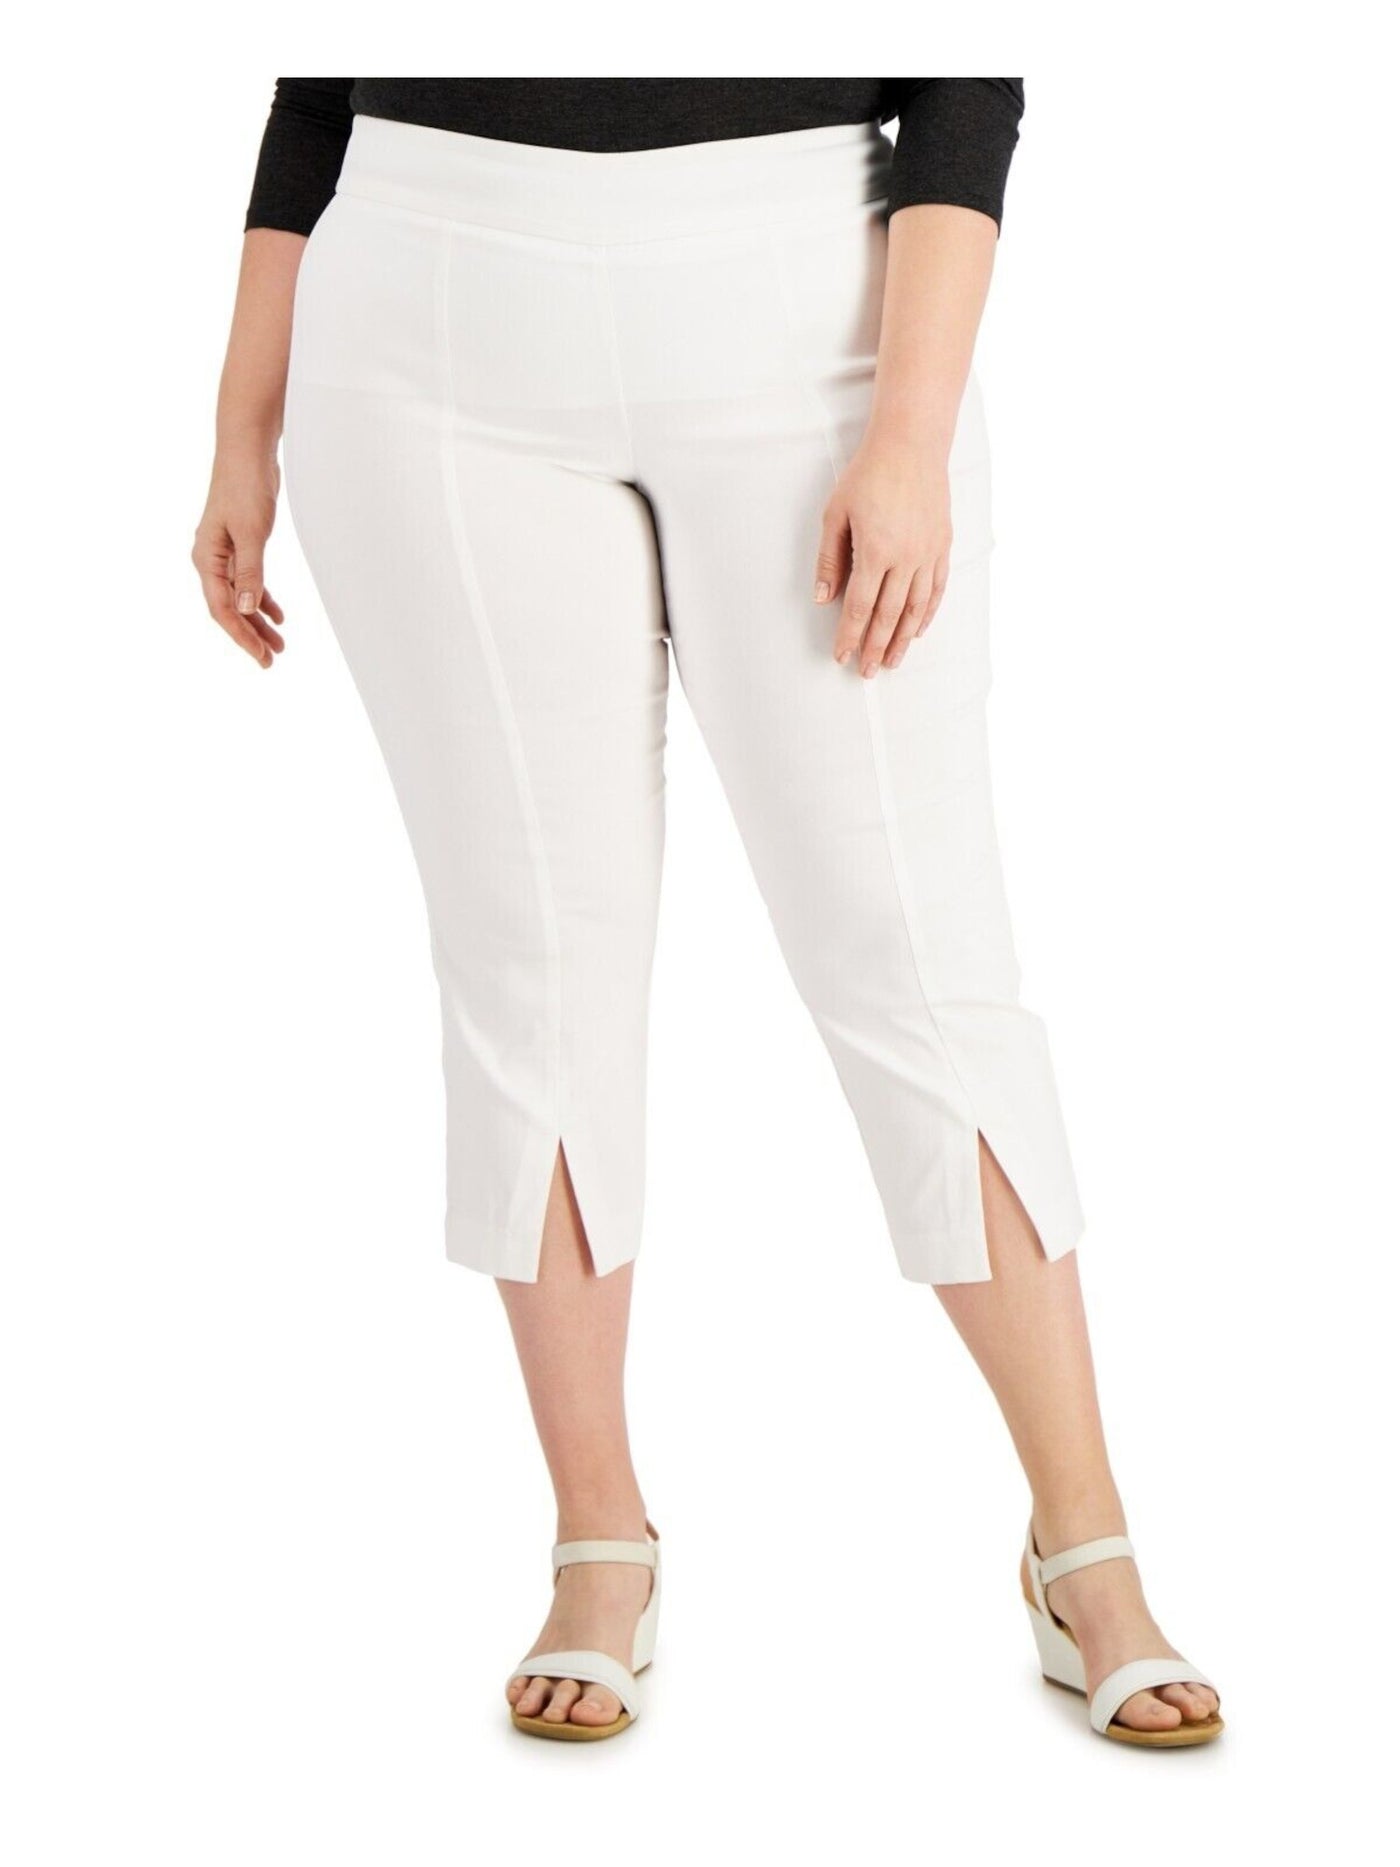 JM COLLECTION Womens White Pocketed Tummy Control Slit Front Hems Wear To Work Capri Pants Plus 3X